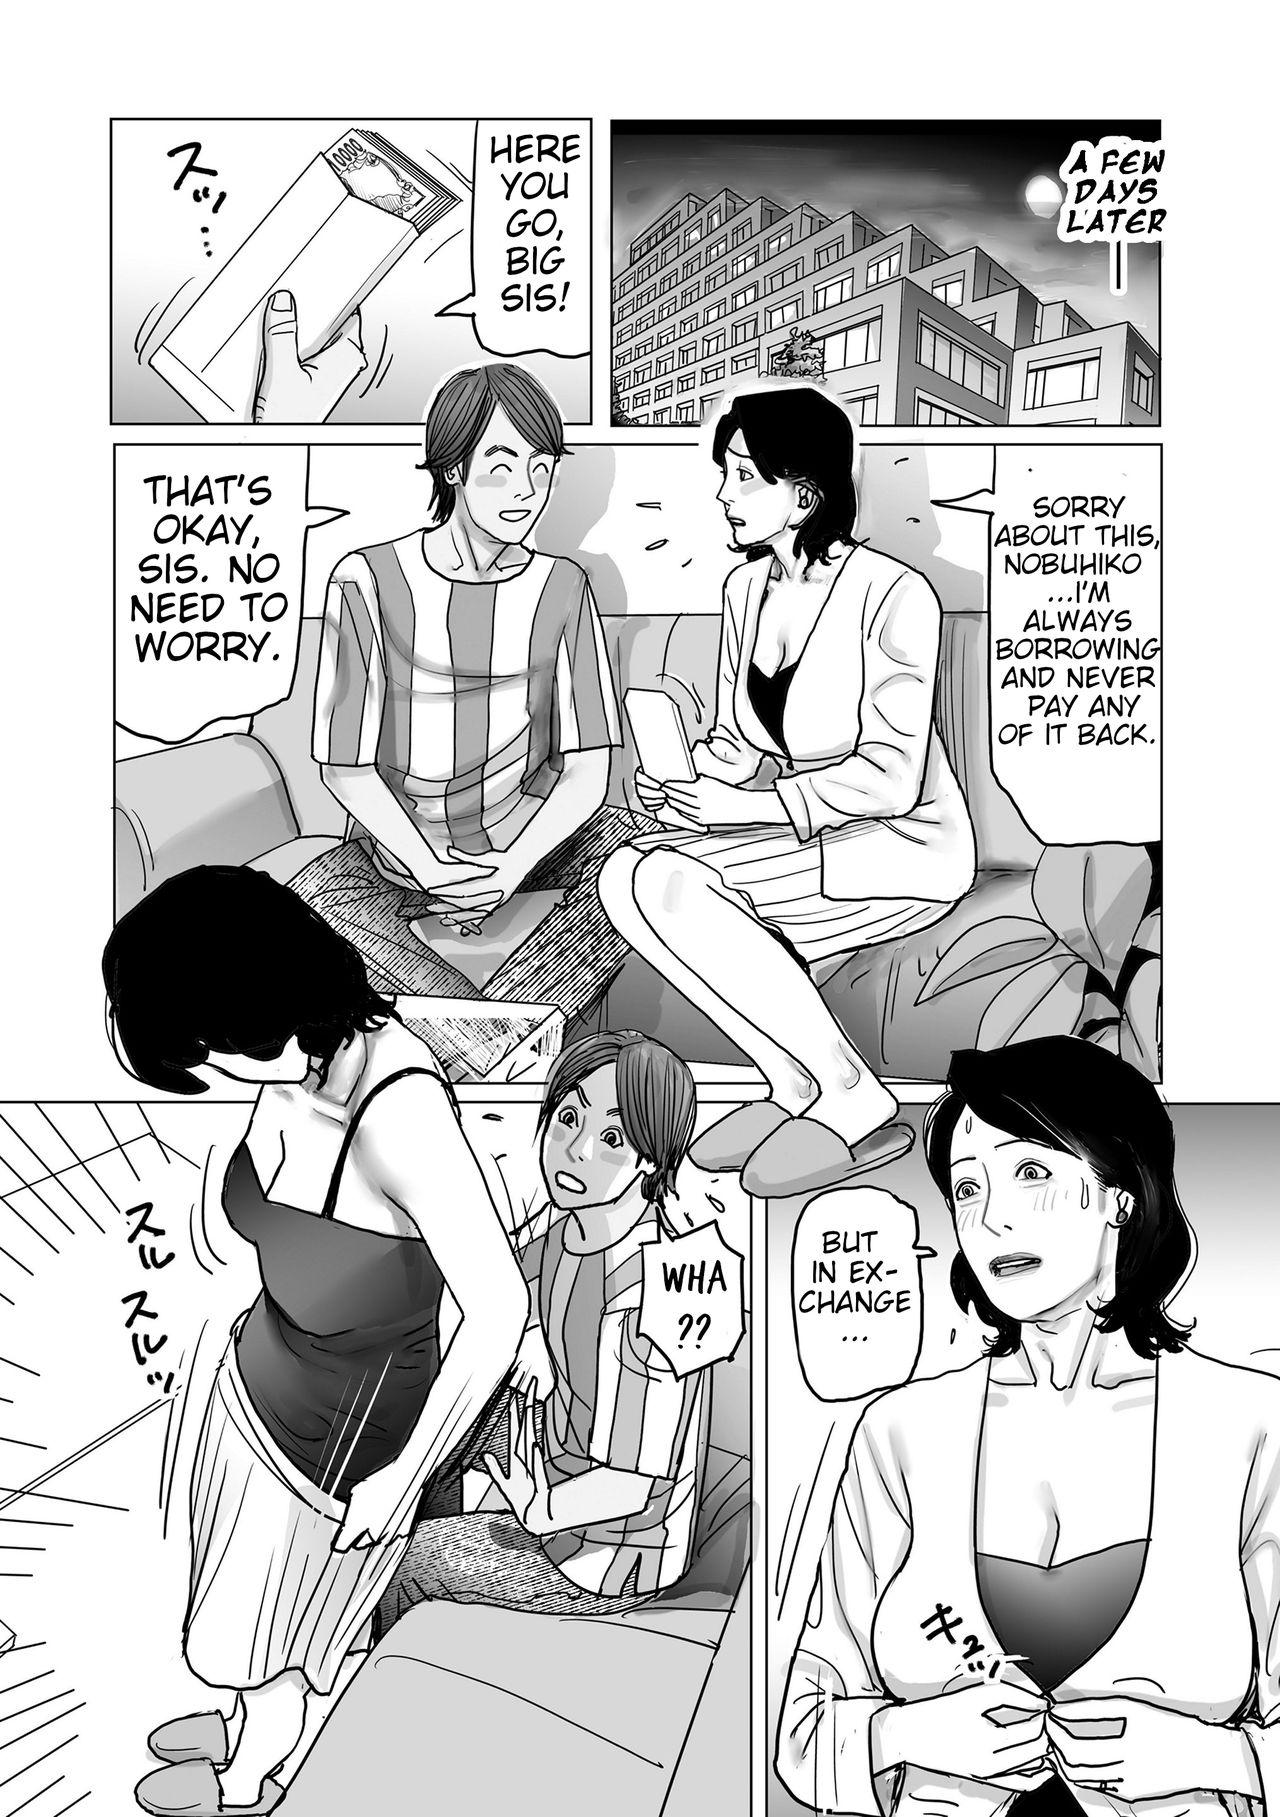 Sucks Kinshinkan De Seikatsuhi wo Eru Hizunda Kyodai | The Twisted Big Sister Who does Incest With Her Little Brother to Get By Pervs - Page 9